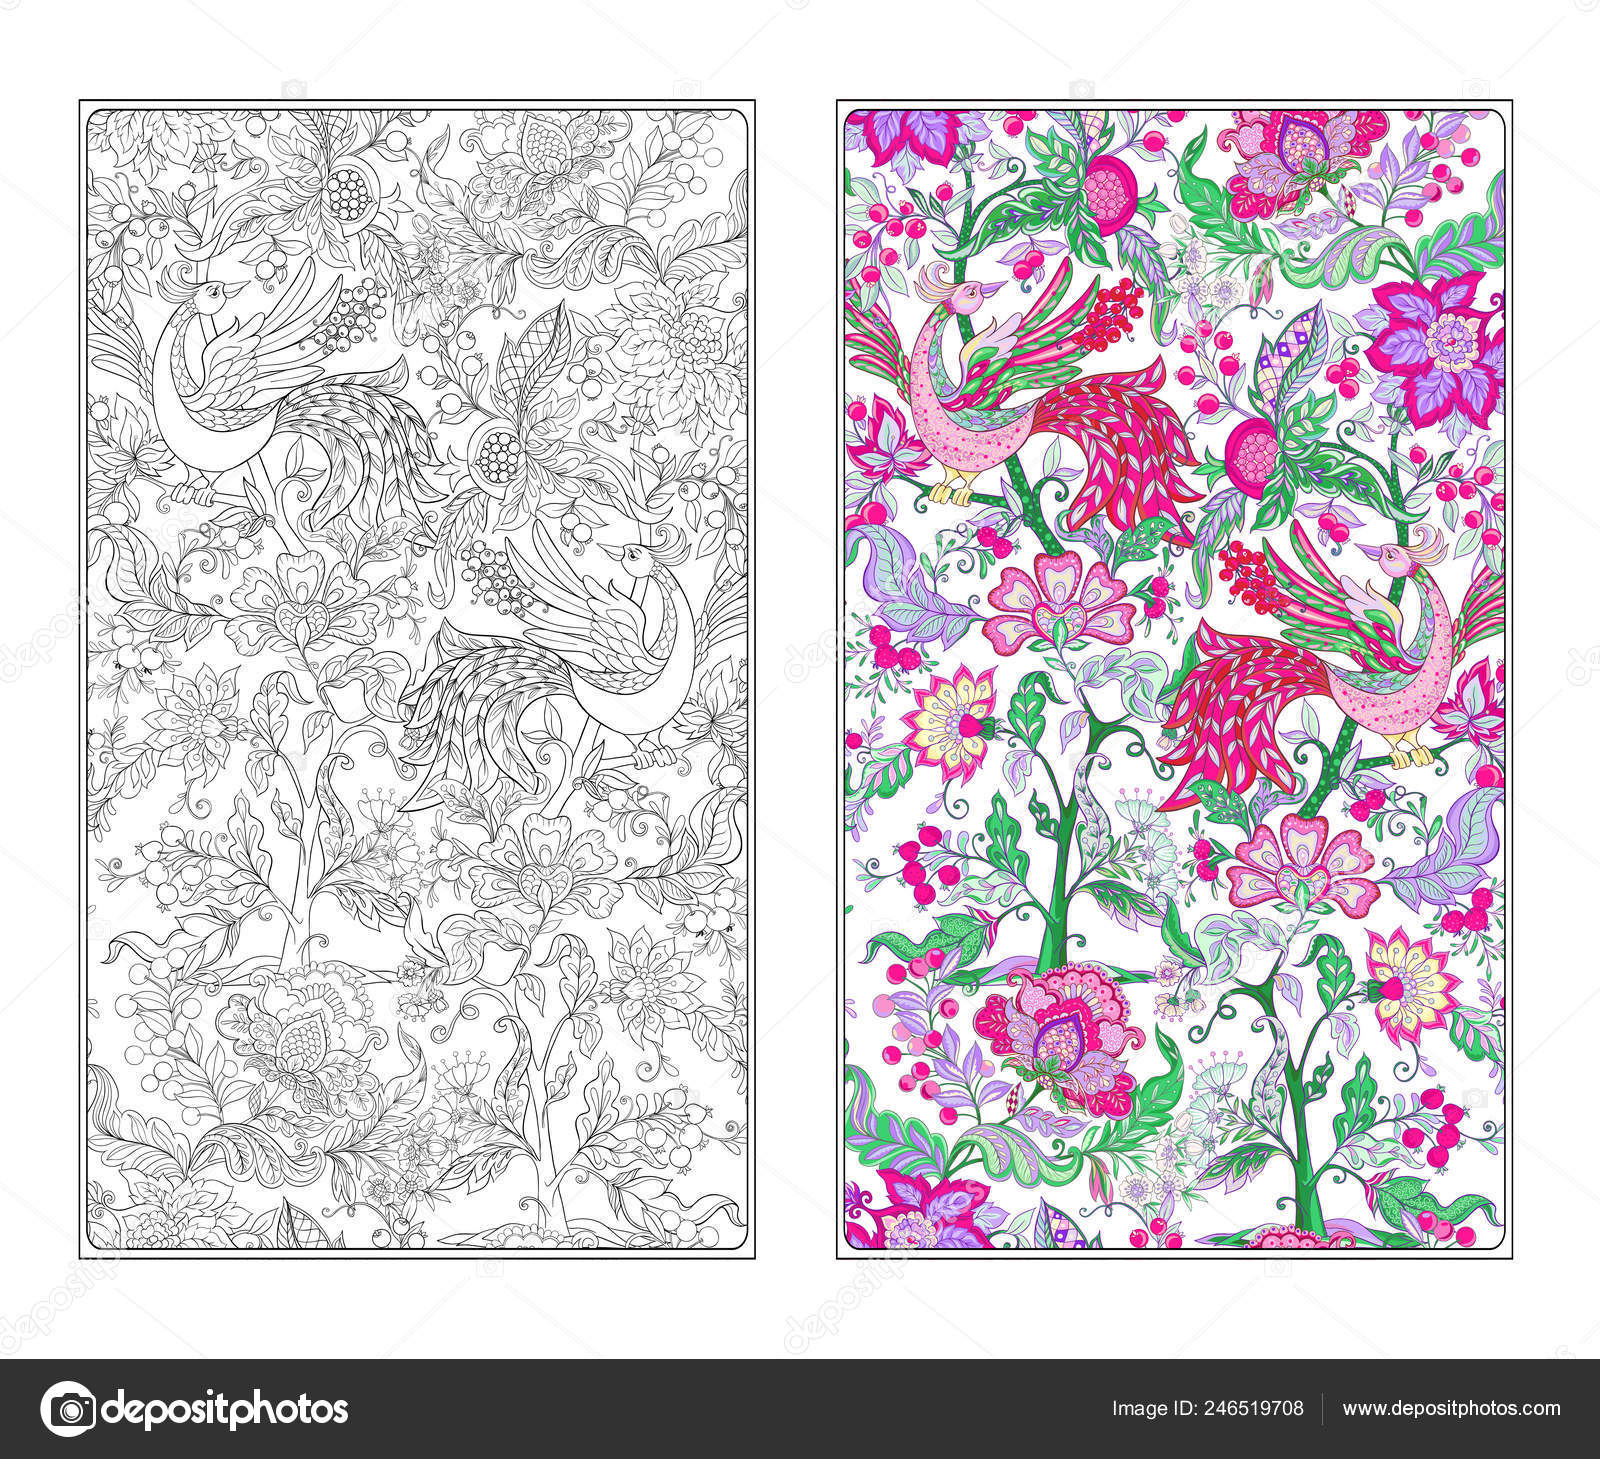 Jacobean Embroidery Patterns Floral Decorative Elements Jacobean Embroidery Style Fantasy Floral